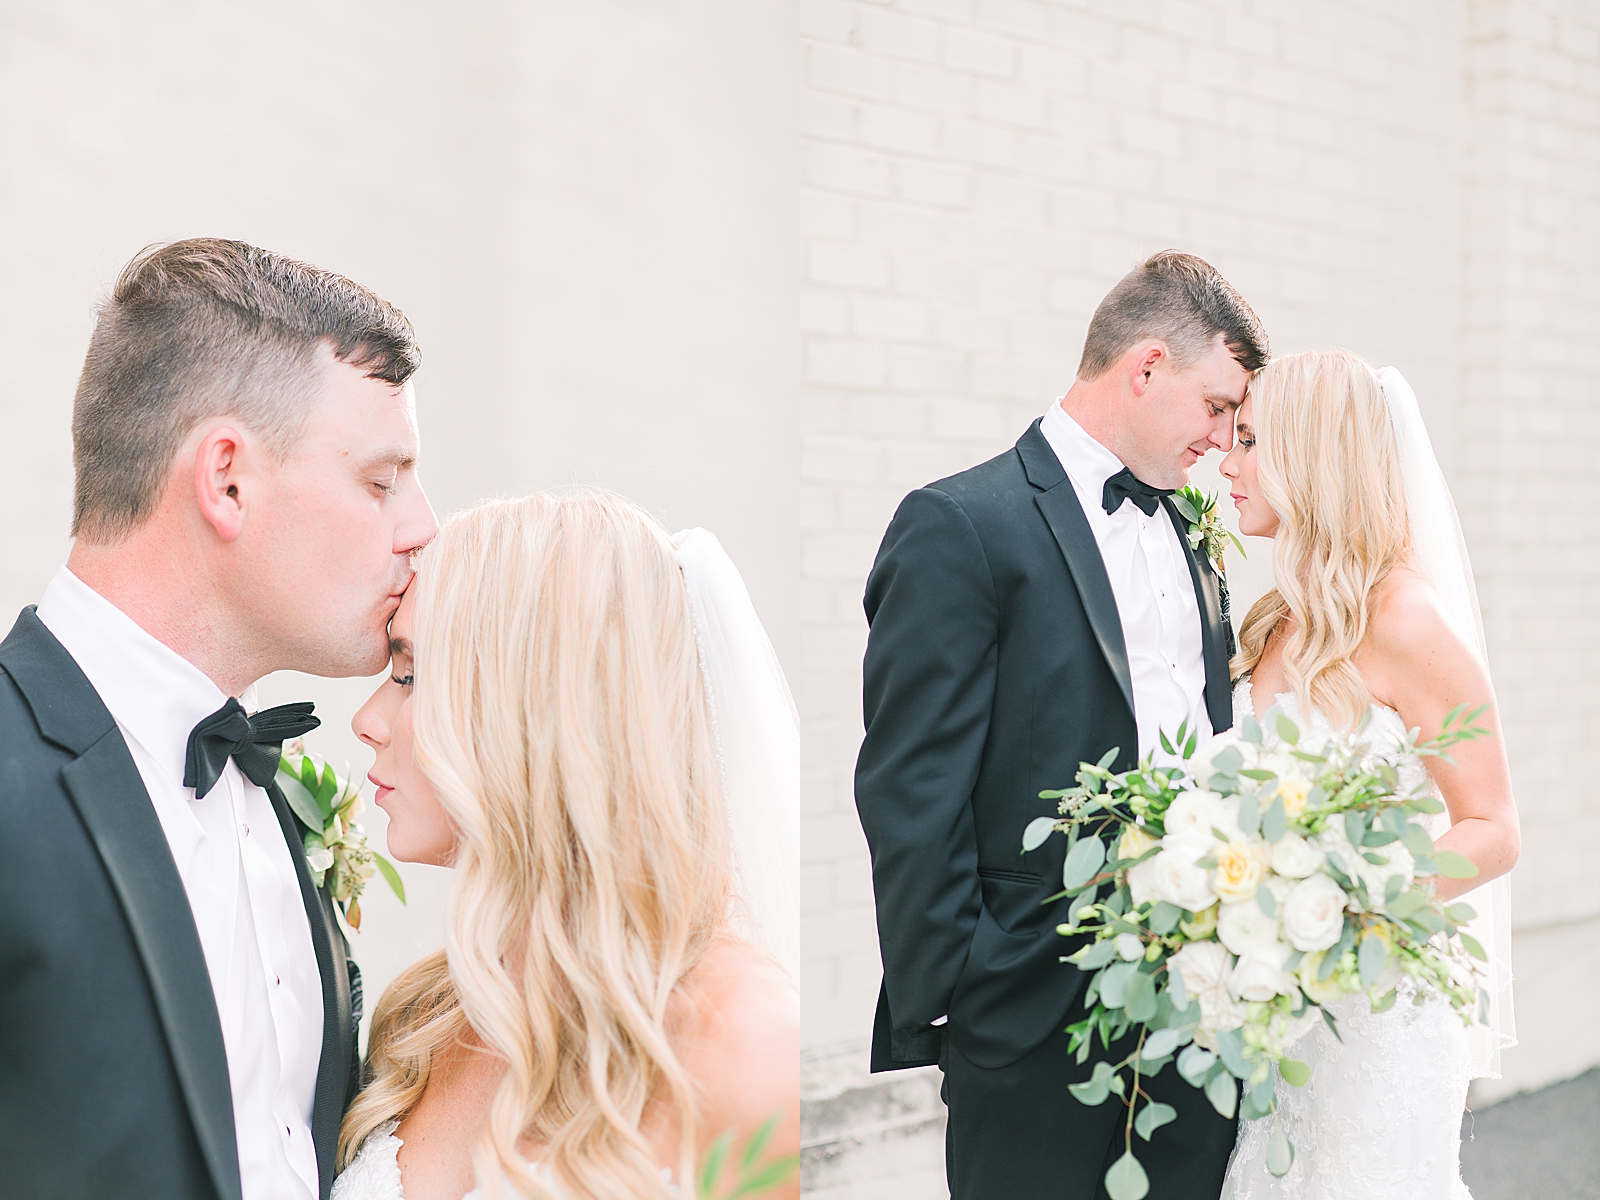 Glover Park Brewery Wedding Groom Kissing Bride on Head and Snuggling Photos